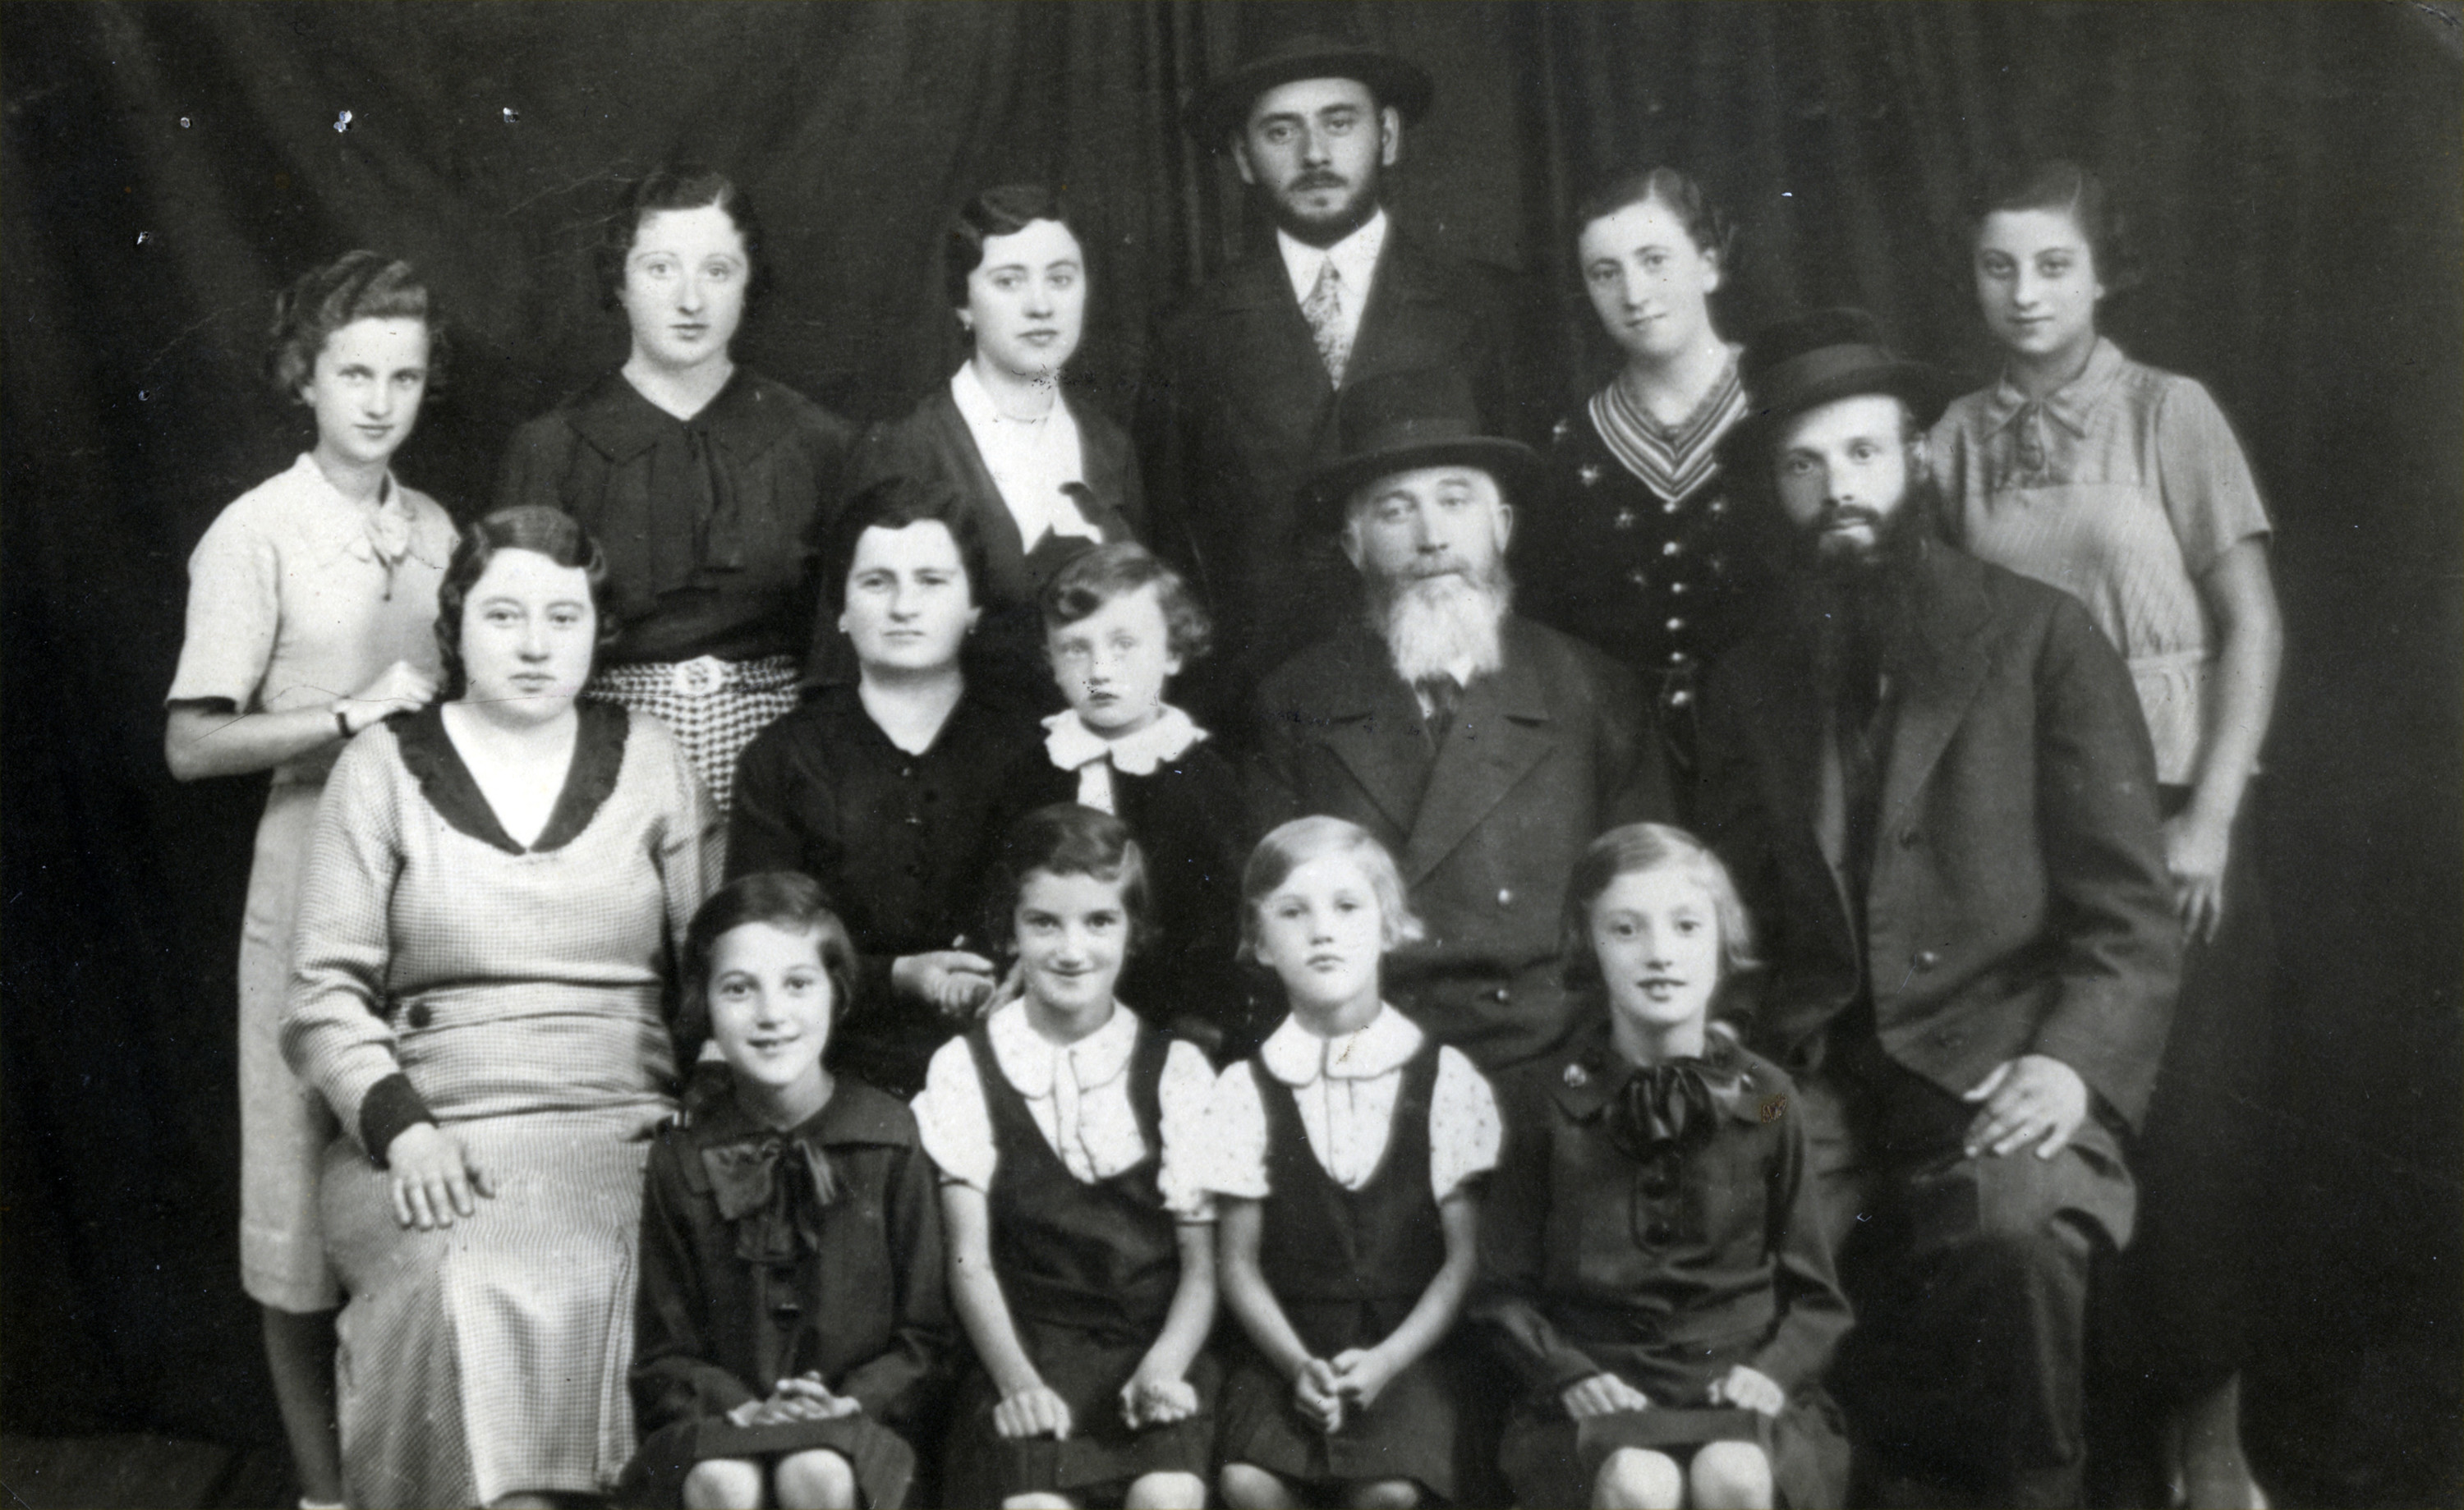 Group photograph of  the Scheiner family in Khust, Czechoslovakia.

Pictured are Lazar and Sharona Scheiner (middle row, fourth and second from the left). Their children are (back row, left to right) Bella, Manci, Berta , Yenu-Jacob, Flora, and Sidi (pictured in the middle row, far left).  Sidi's husband Yeheskel is pictued in the middle row, on the far right.  Berta's son, Liebiku is seated between Lazar and Sharona.  Seated in the front row are Sidi and Yeheskel's daughters Etu, Tuti, Malka, and Dvora.